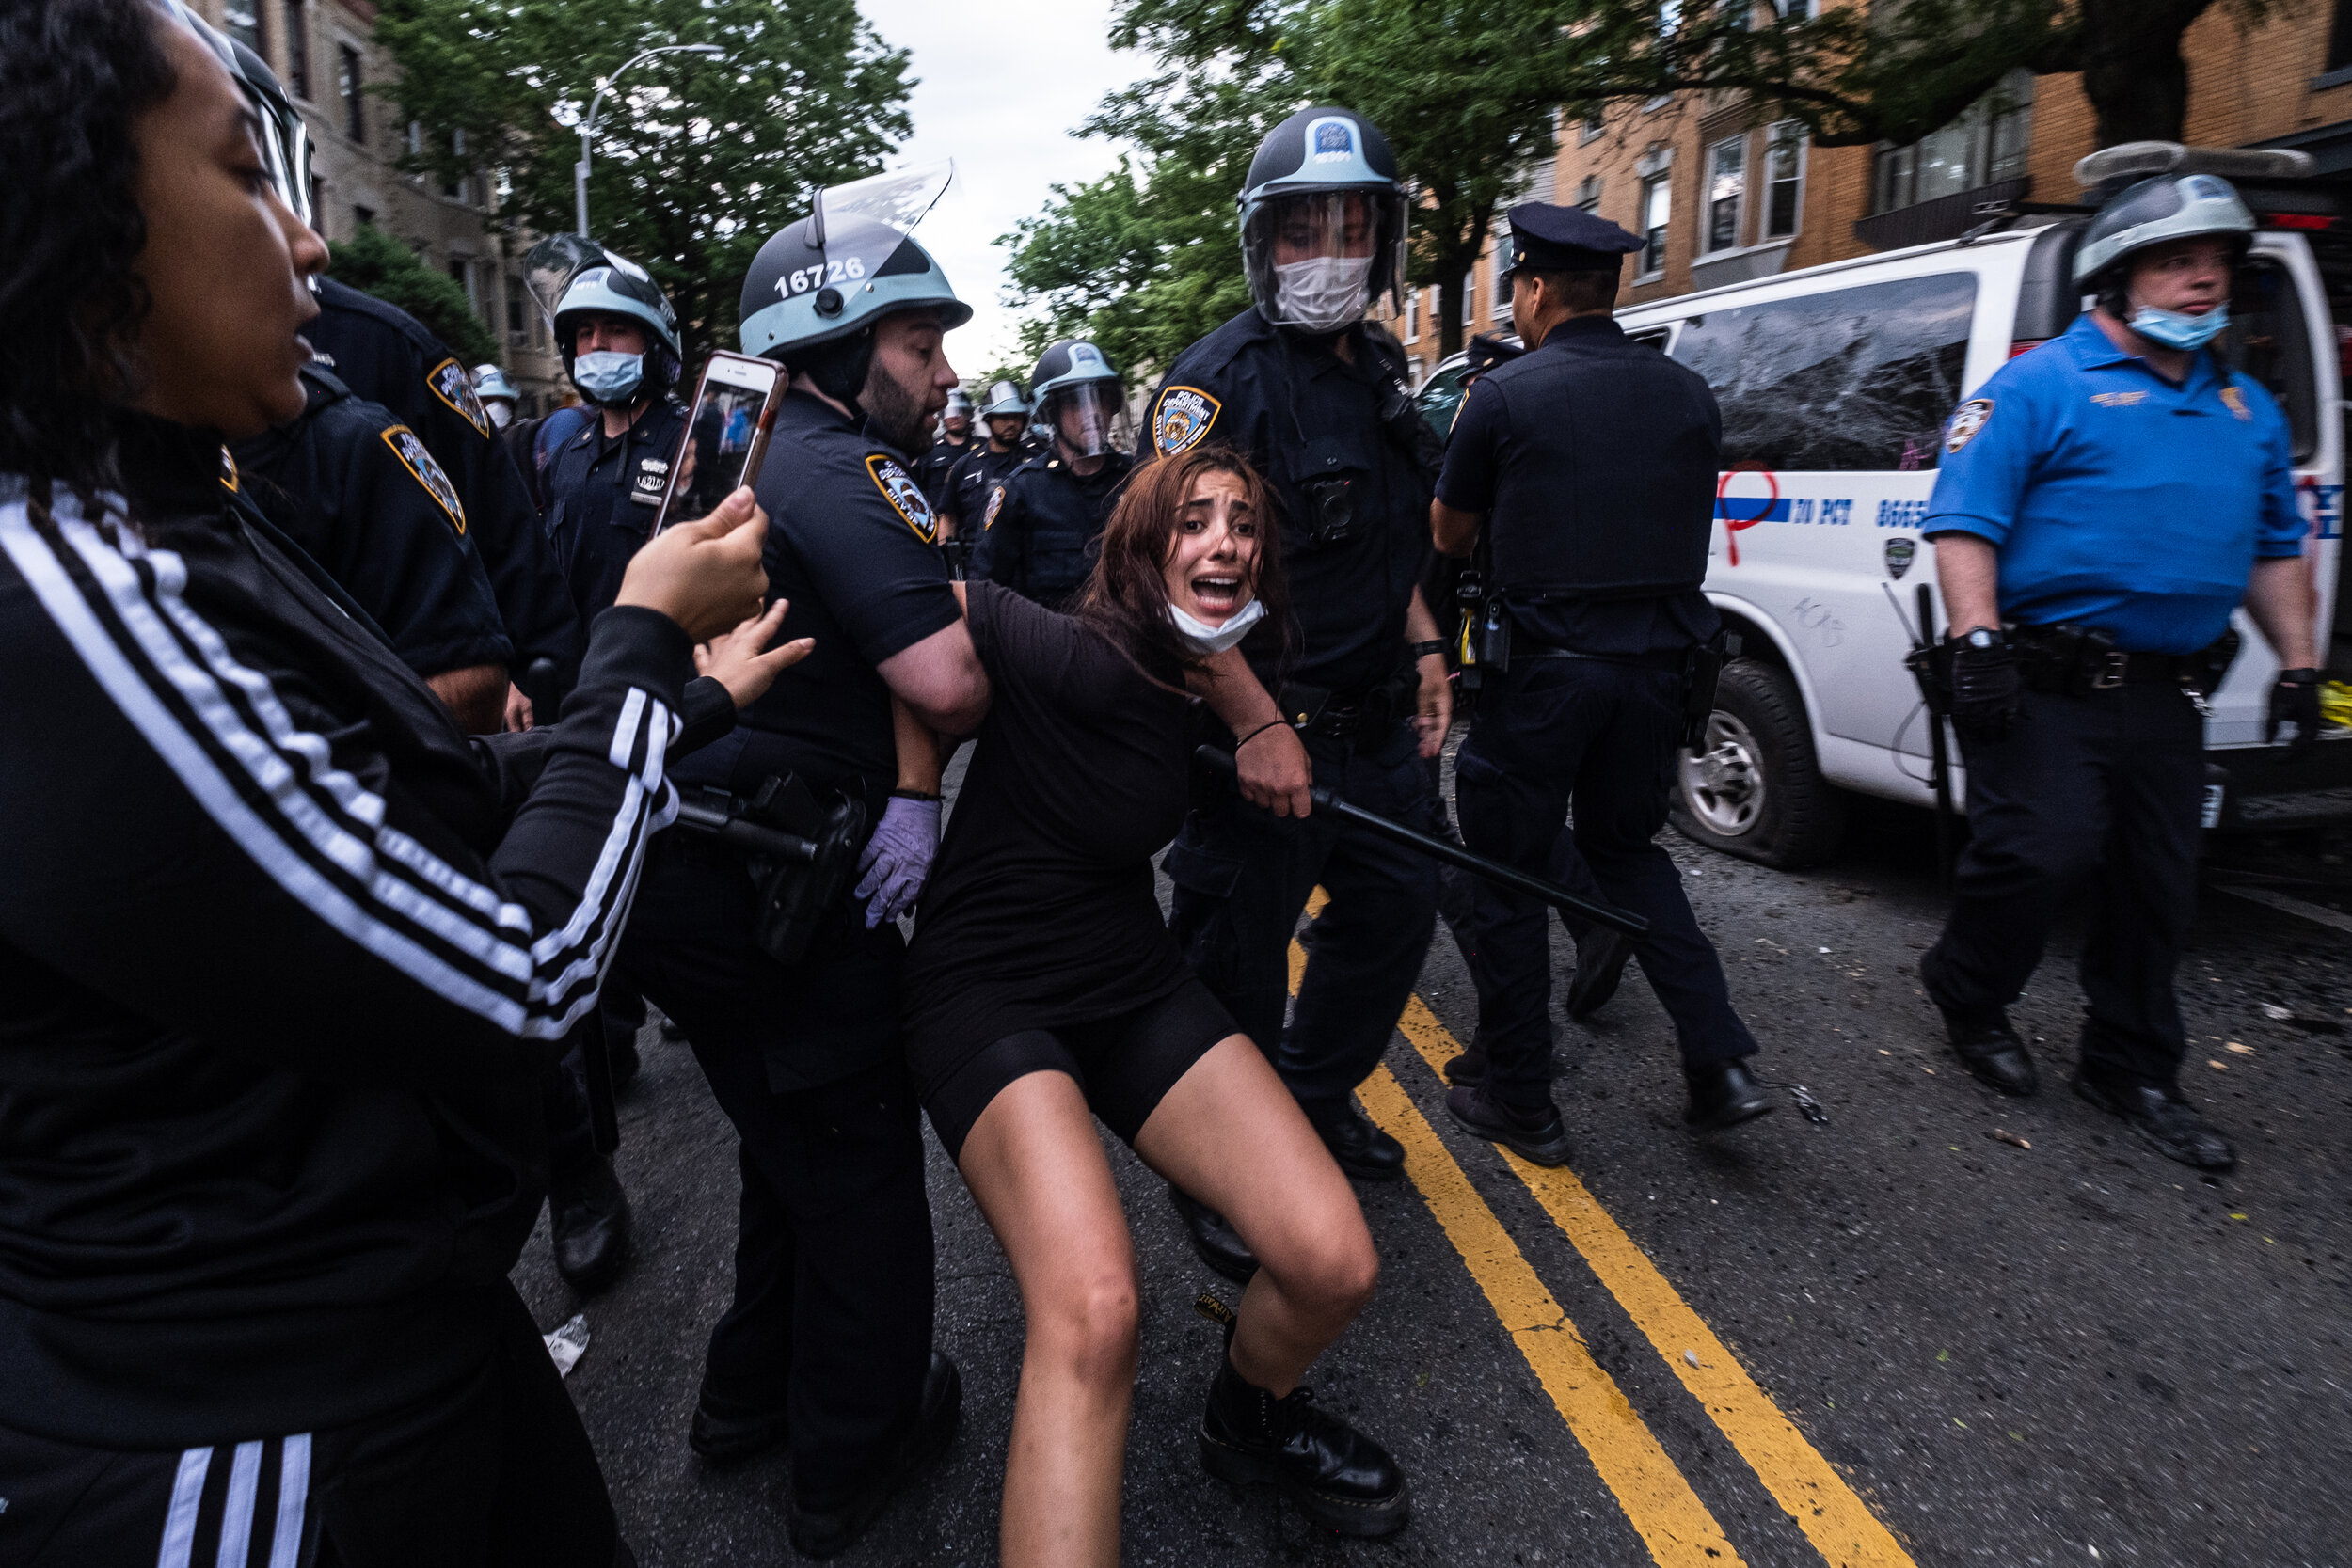  May 30, 2020: New York, NY -   A woman is detained as protesters clash with NYPD officers in Flatbush, Brooklyn after George Floyd was killed while being detained by Minneapolis police on May 25.  